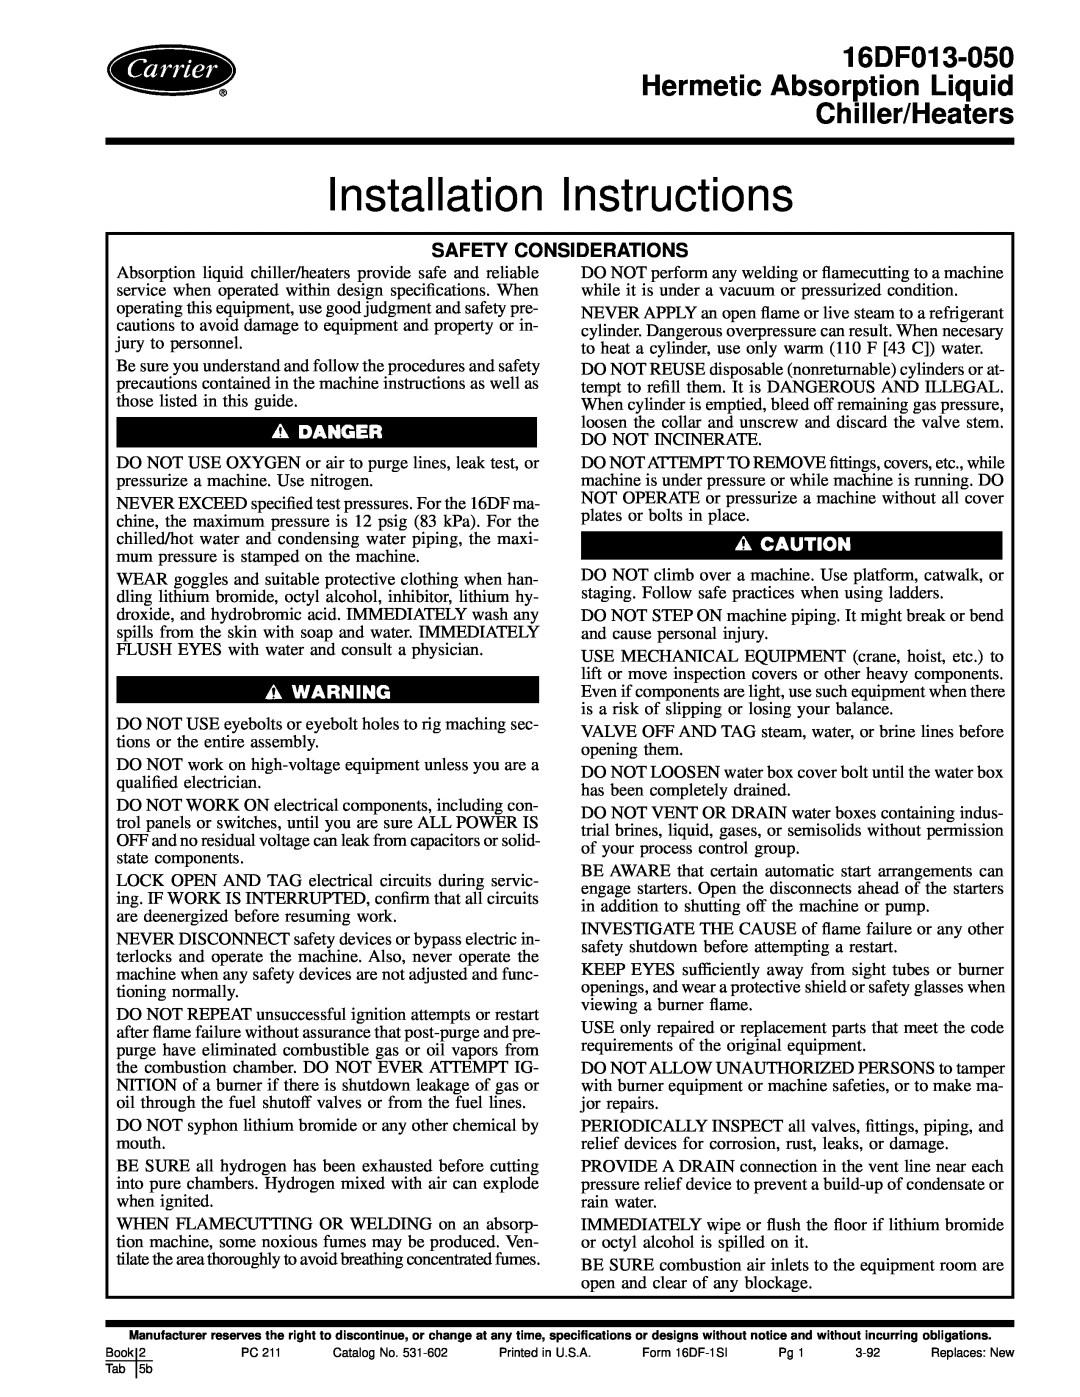 Carrier 16DF013-050 installation instructions Safety Considerations, Installation Instructions 